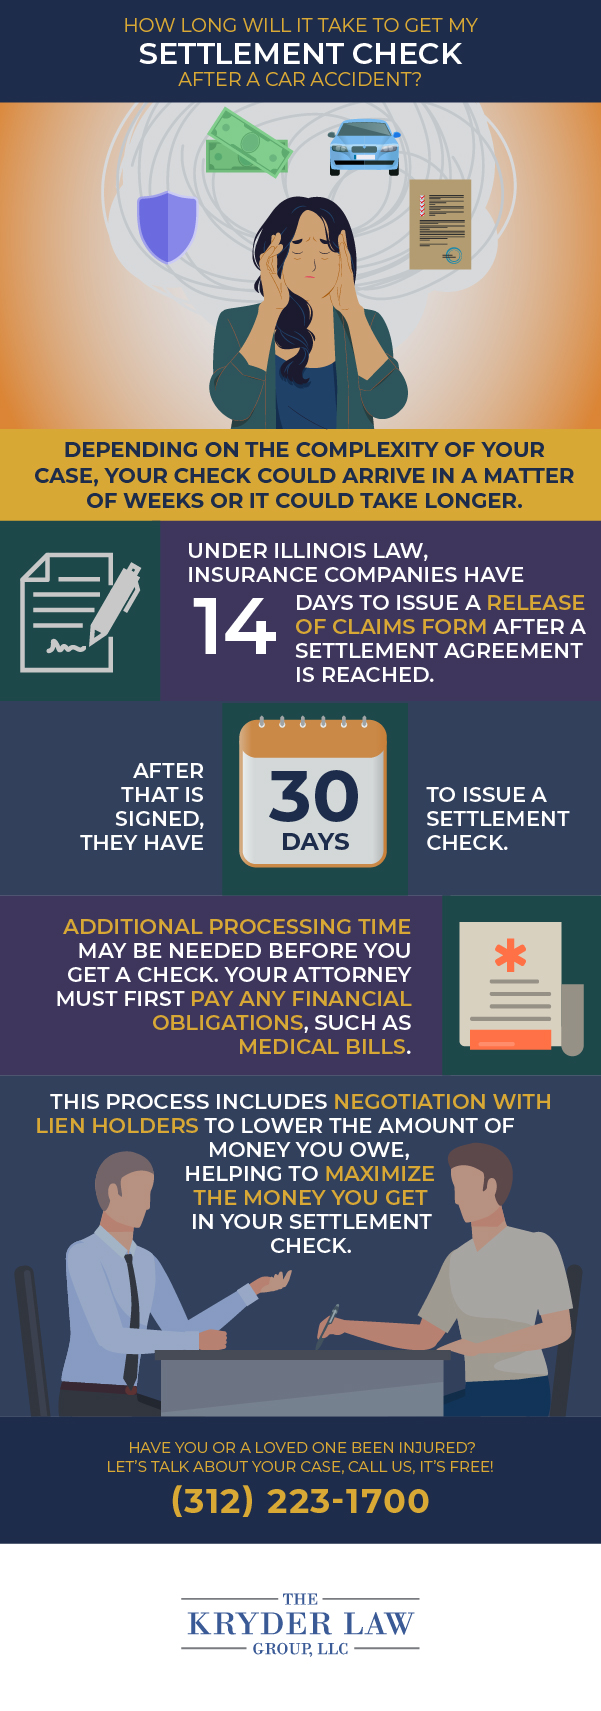 How Long Will It Take to Get My Settlement Check After a Car Accident Infographic